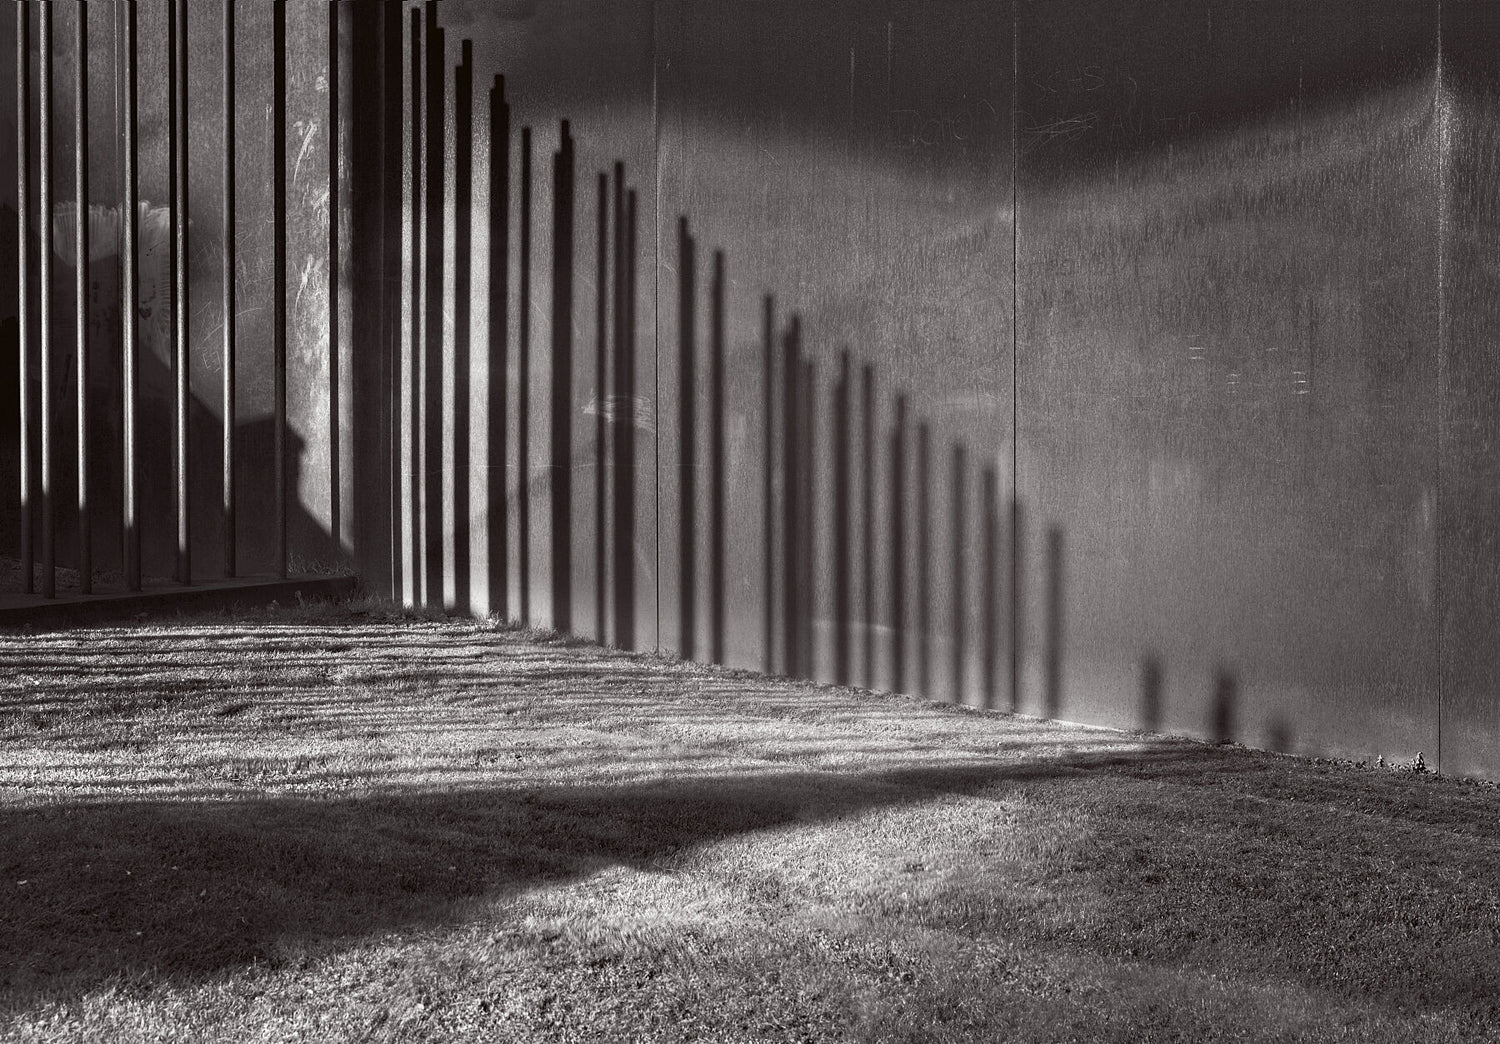 Beyond the Wall - Berlin Wall Memorial - Horizon - bw - limited edition (1) - Giclee Hahnemuhle Photorag